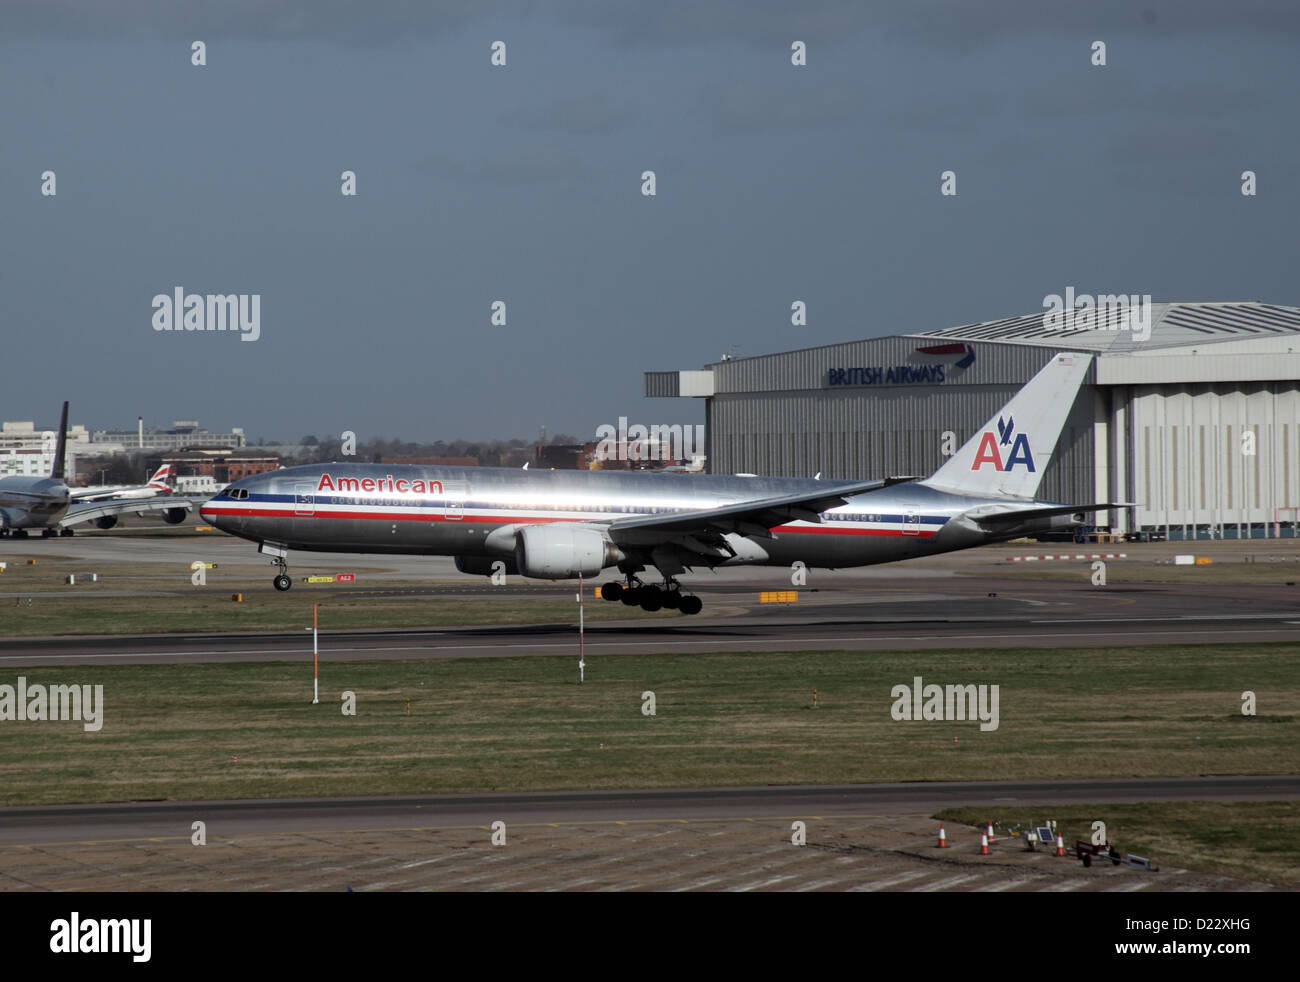 American Airlines Passenger Aircraft landing at London Heathrow Airport Stock Photo